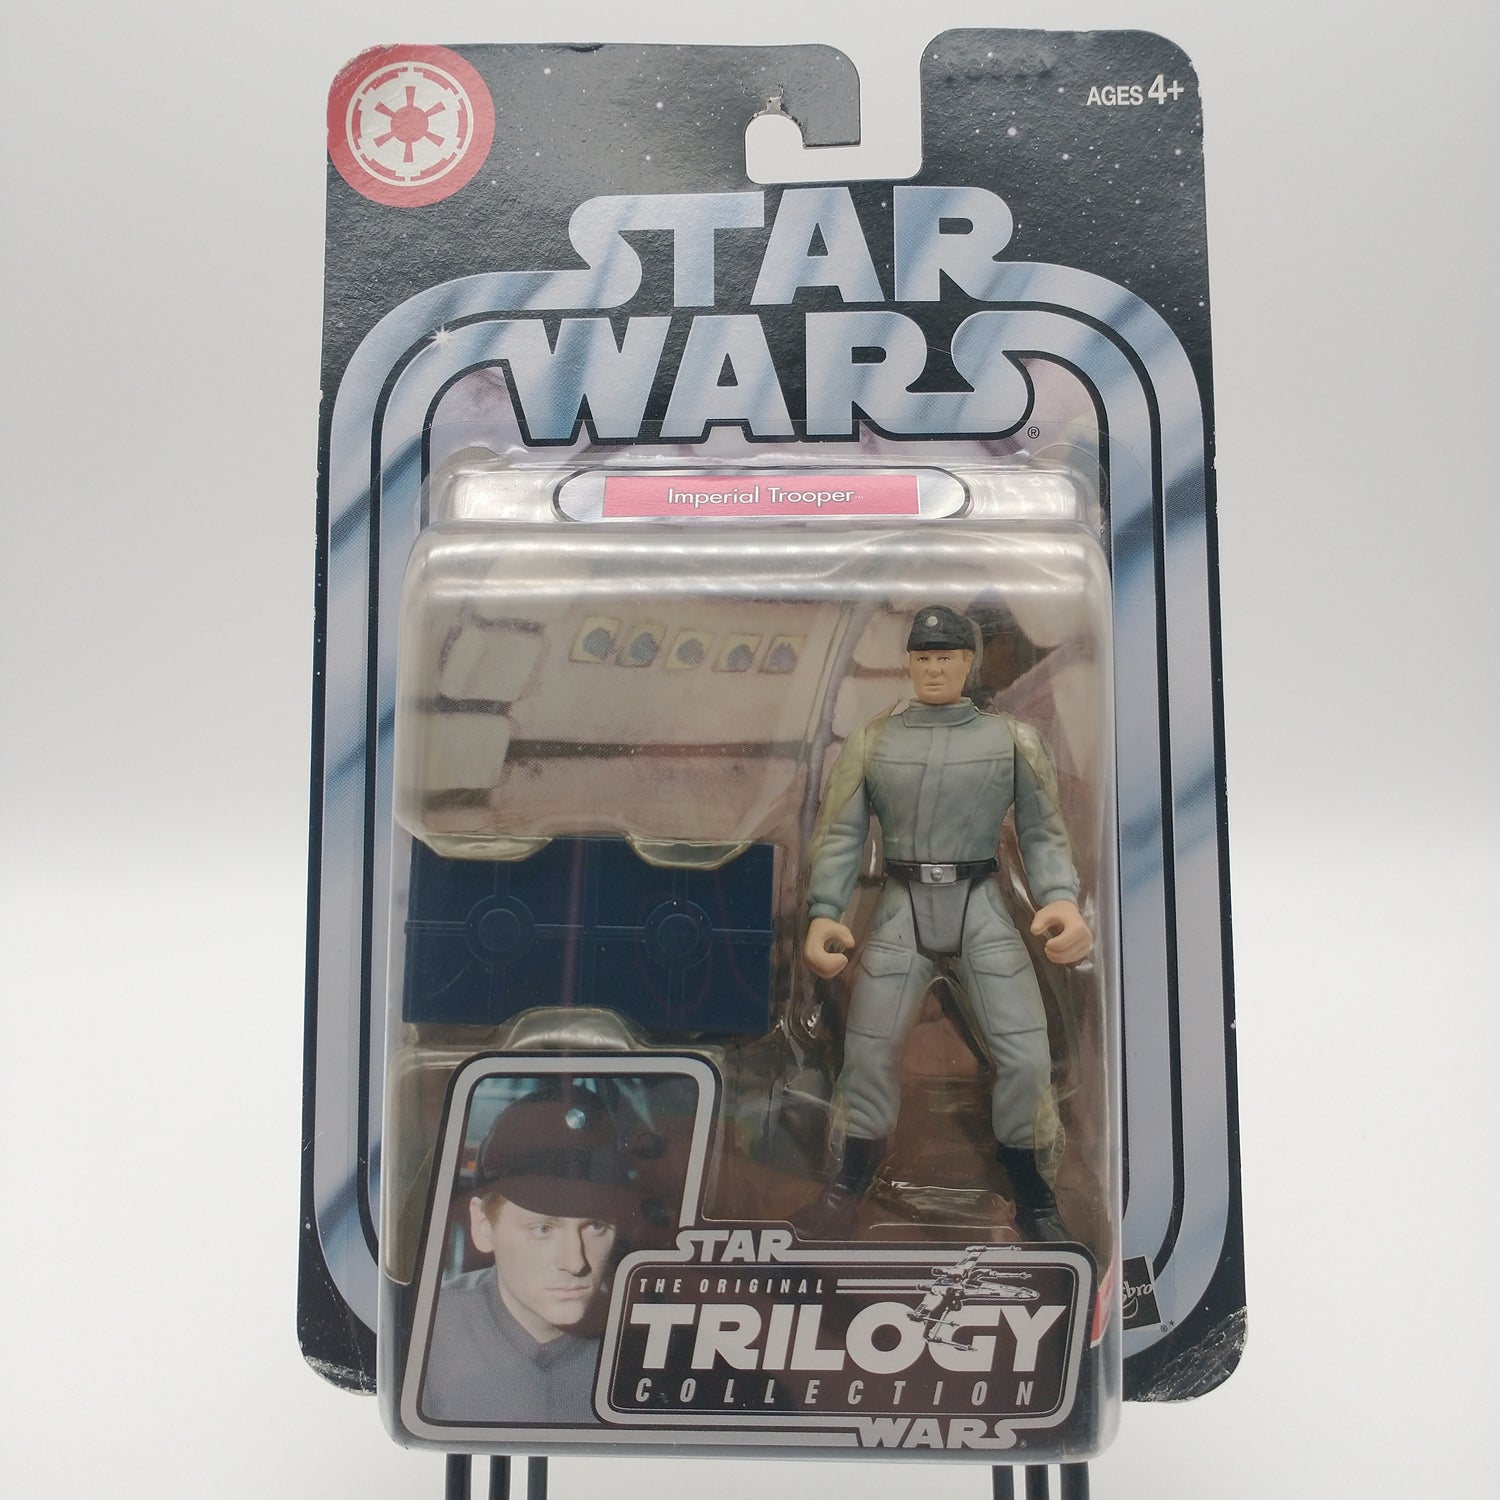 The front of the box and bubble. The bubble is sealed but slightly yellowed. The action figure is inside, he is a man wearing a gray suit and a black hat. 